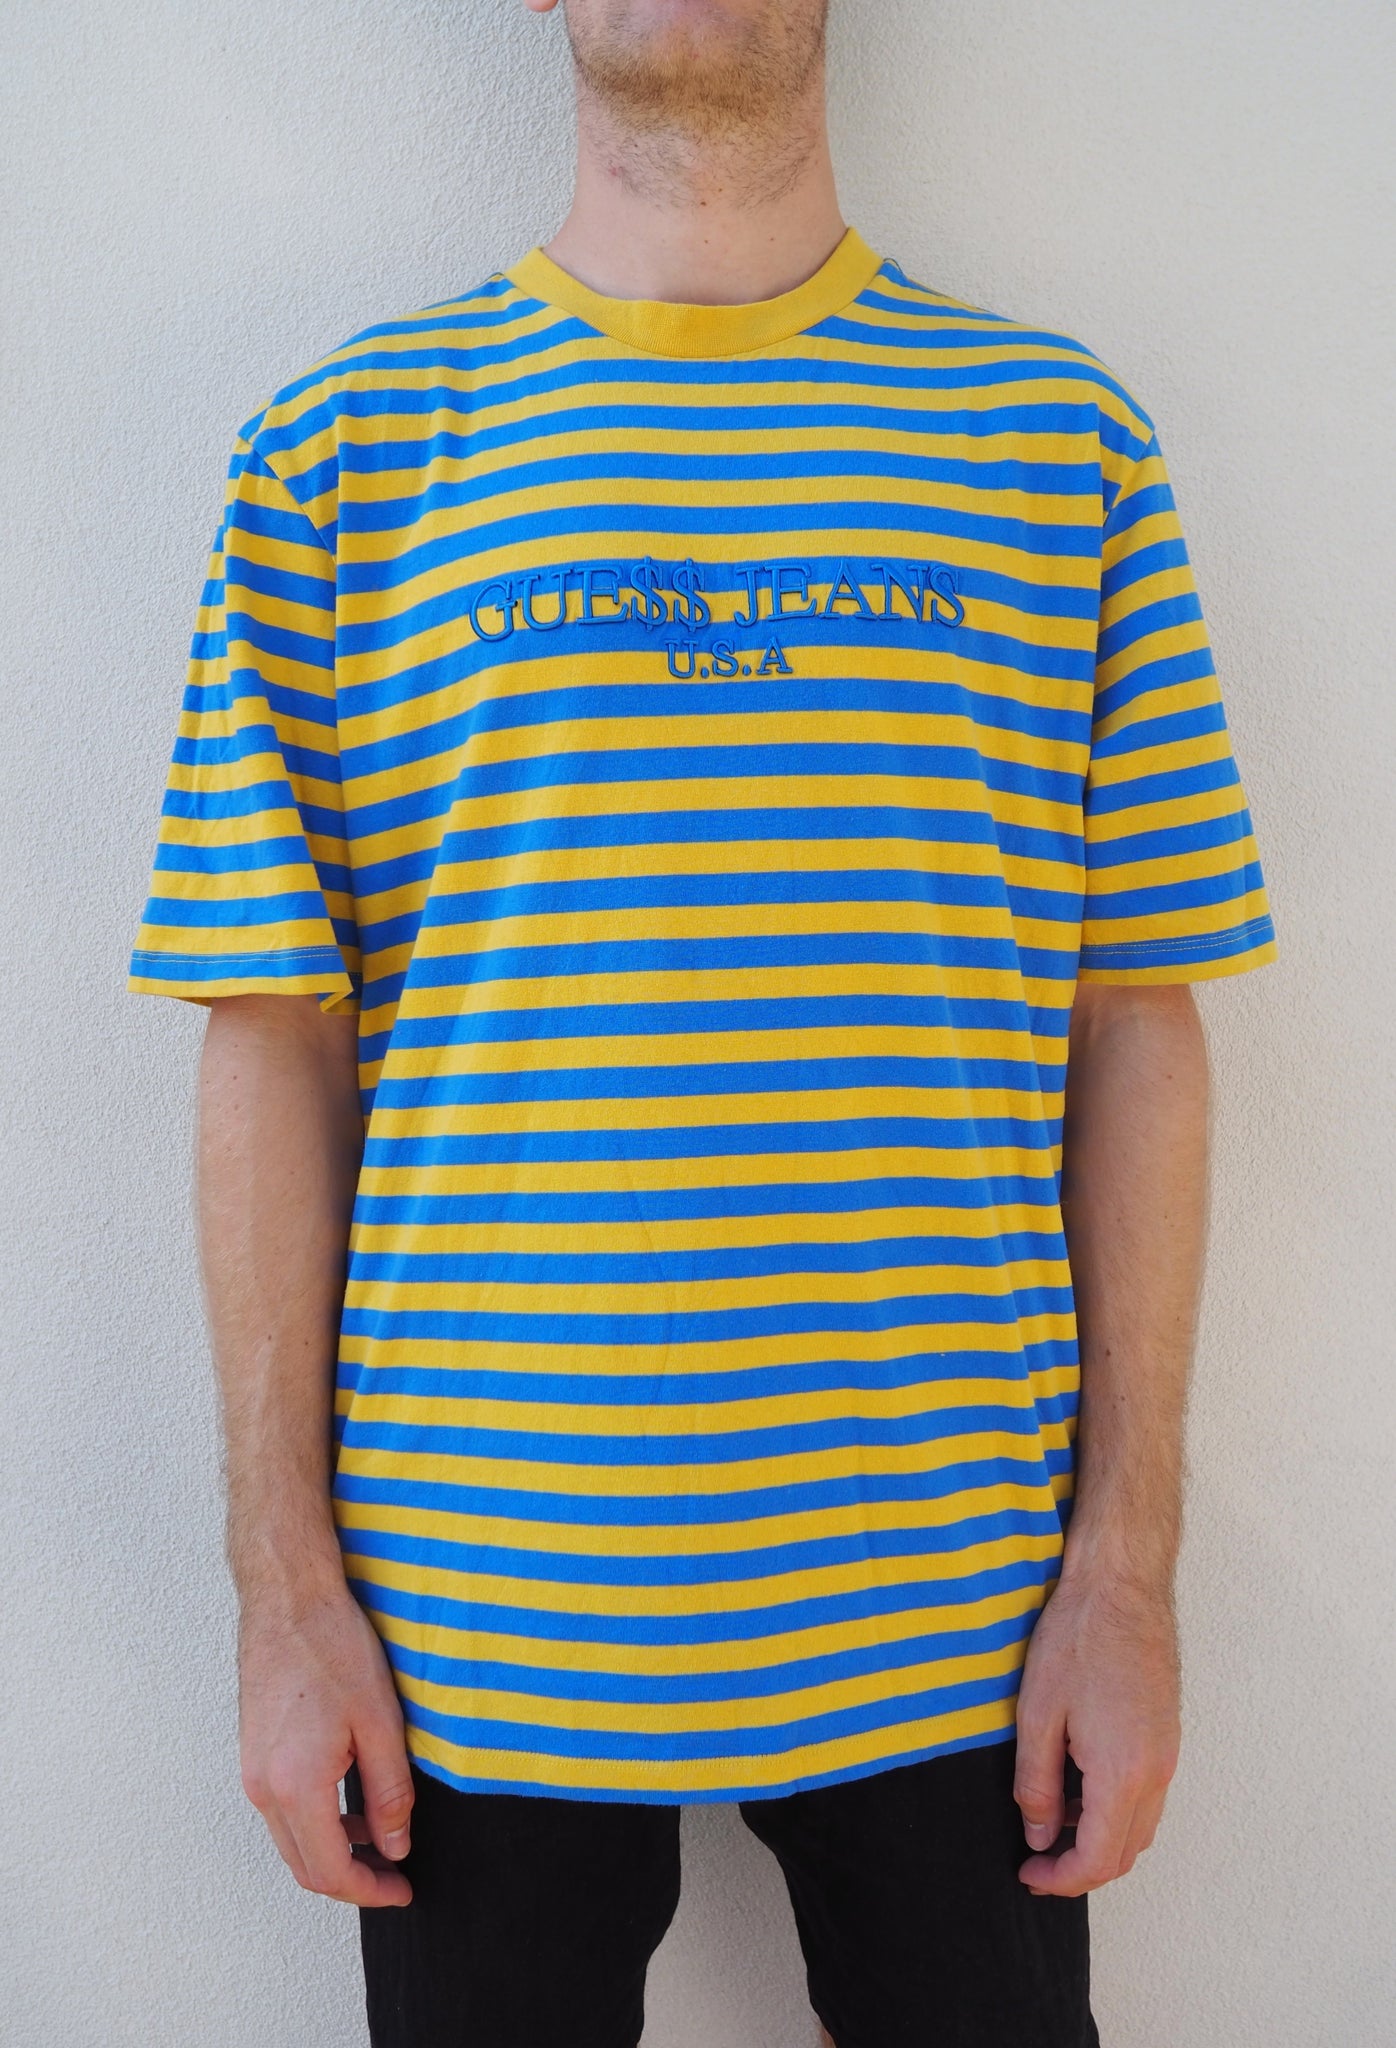 1) Guess Jeans Stripe T-shirt ASAP Rocky & Yellow – The Youth Revolt